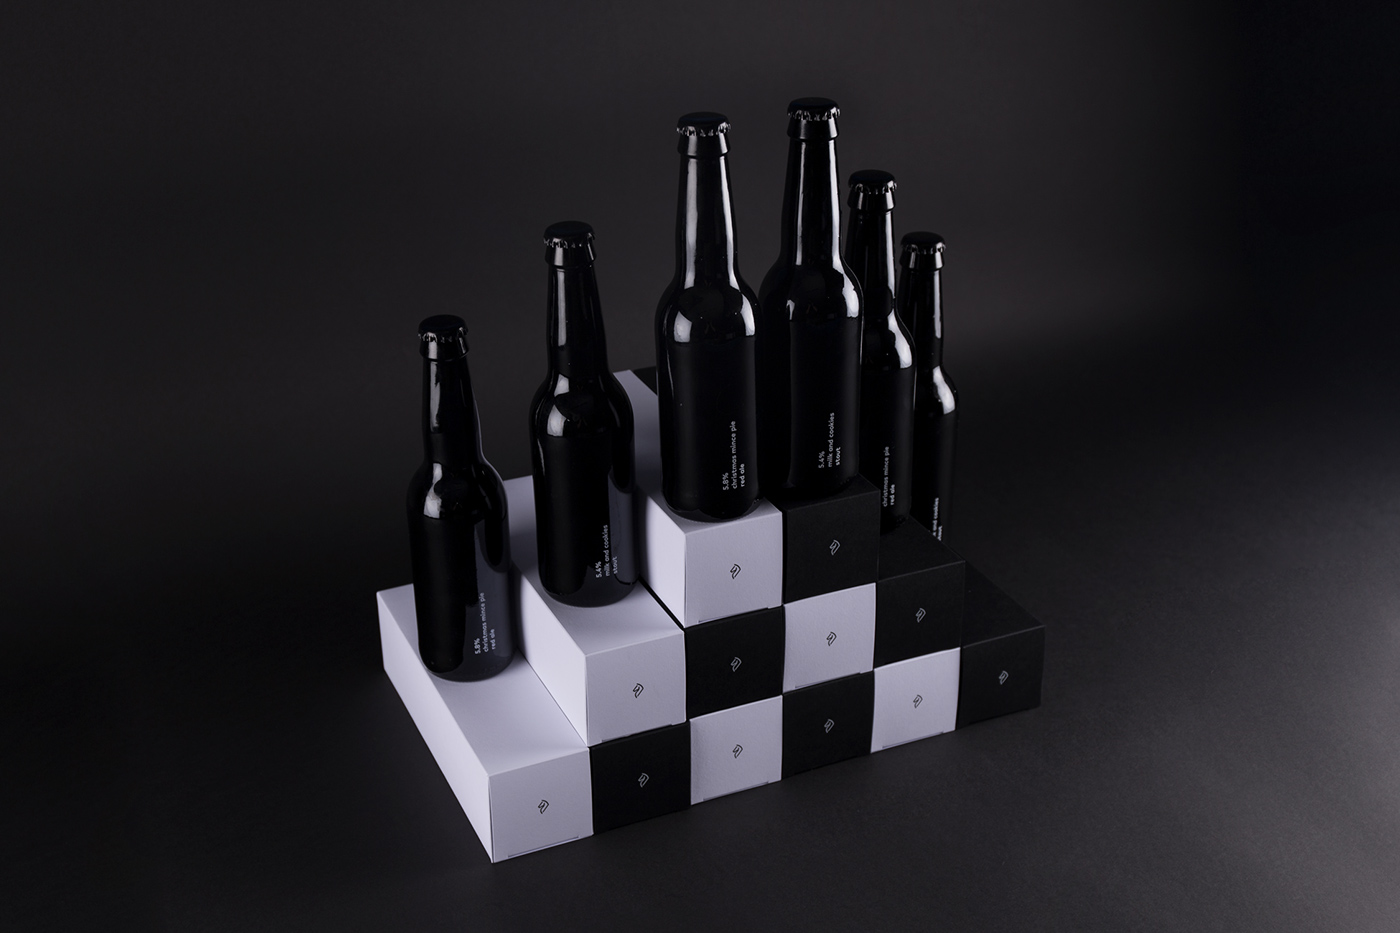 knight chess strategy craft beer black and white